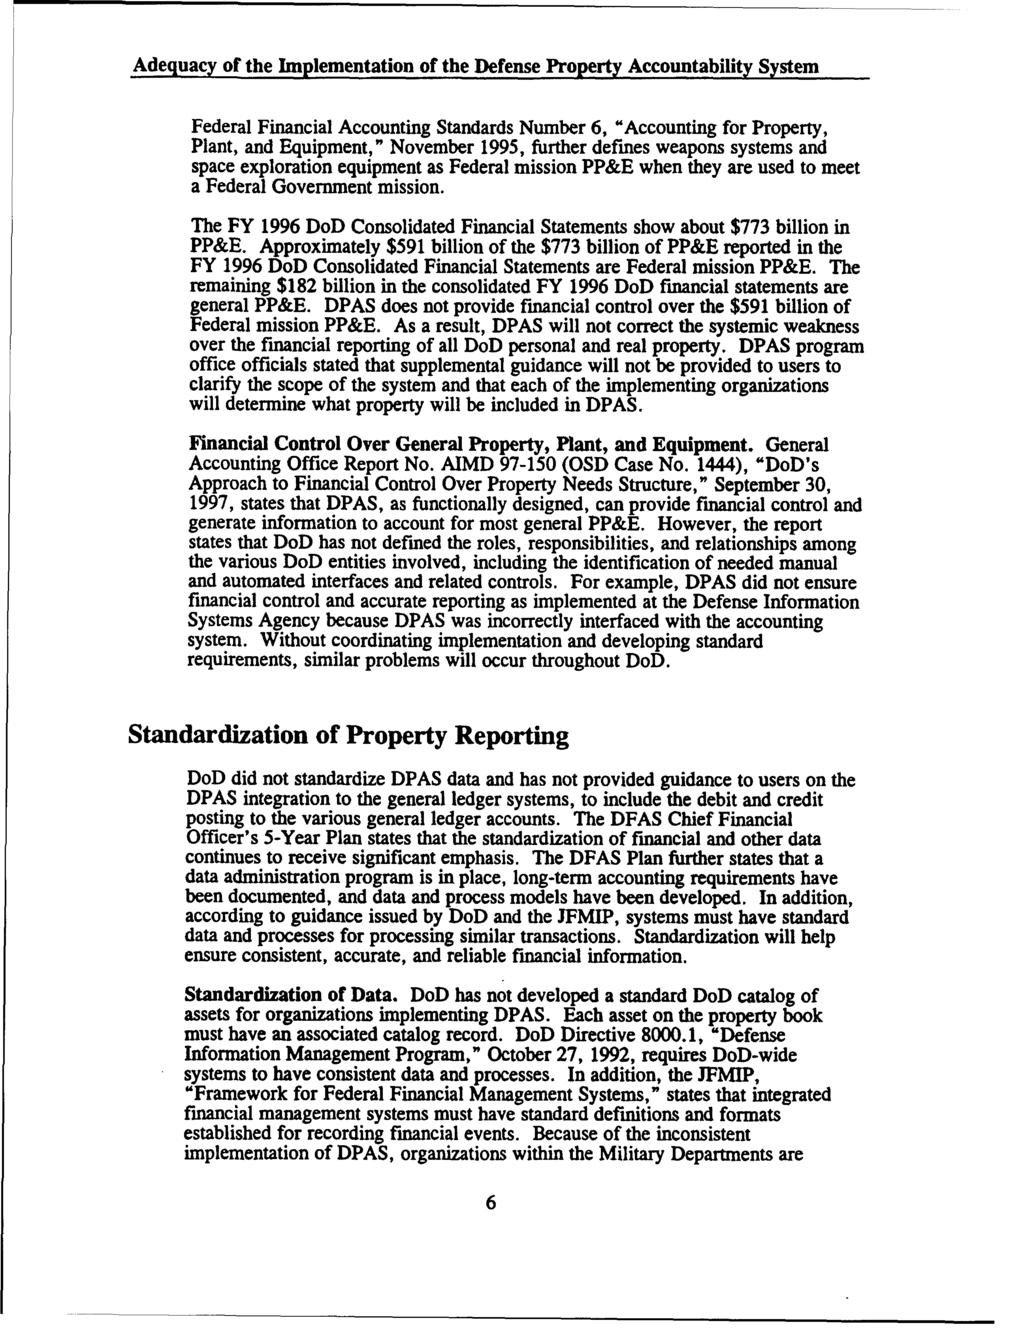 Adequacy of the Implementation of the Defense Property Accountability System Federal Financial Accounting Standards Number 6, "Accounting for Property, Plant, and Equipment," November 1995, further